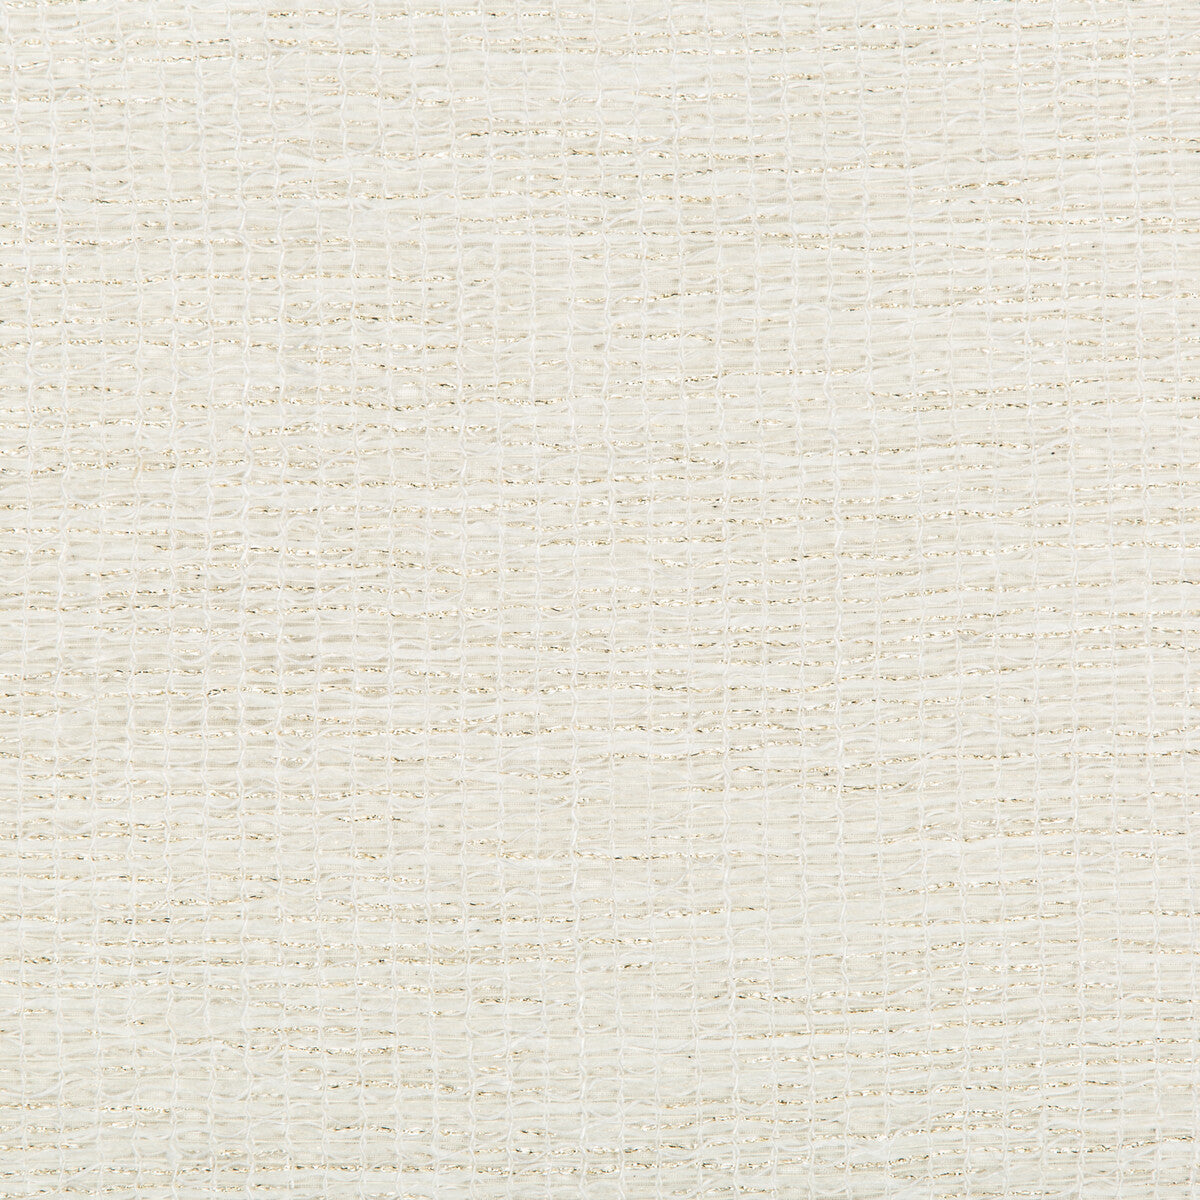 Quiescent fabric in ivory color - pattern 4461.1.0 - by Kravet Couture in the Sue Firestone Malibu collection